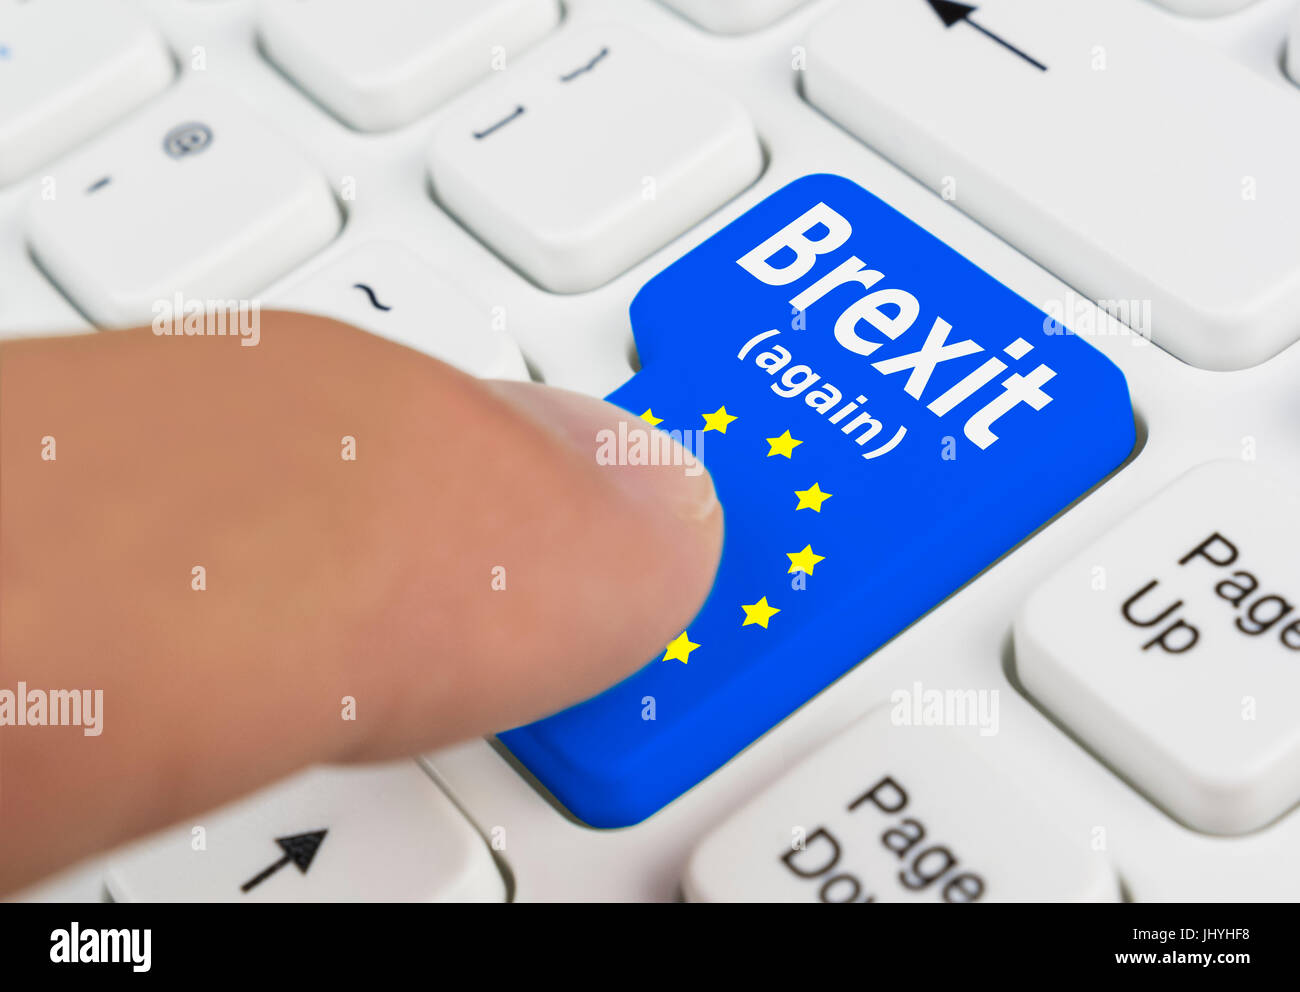 Brexit button showing someone voting for the UK to exit the EU in a 2nd referendum. Second Brexit referendum. Second Brexit vote. Stock Photo